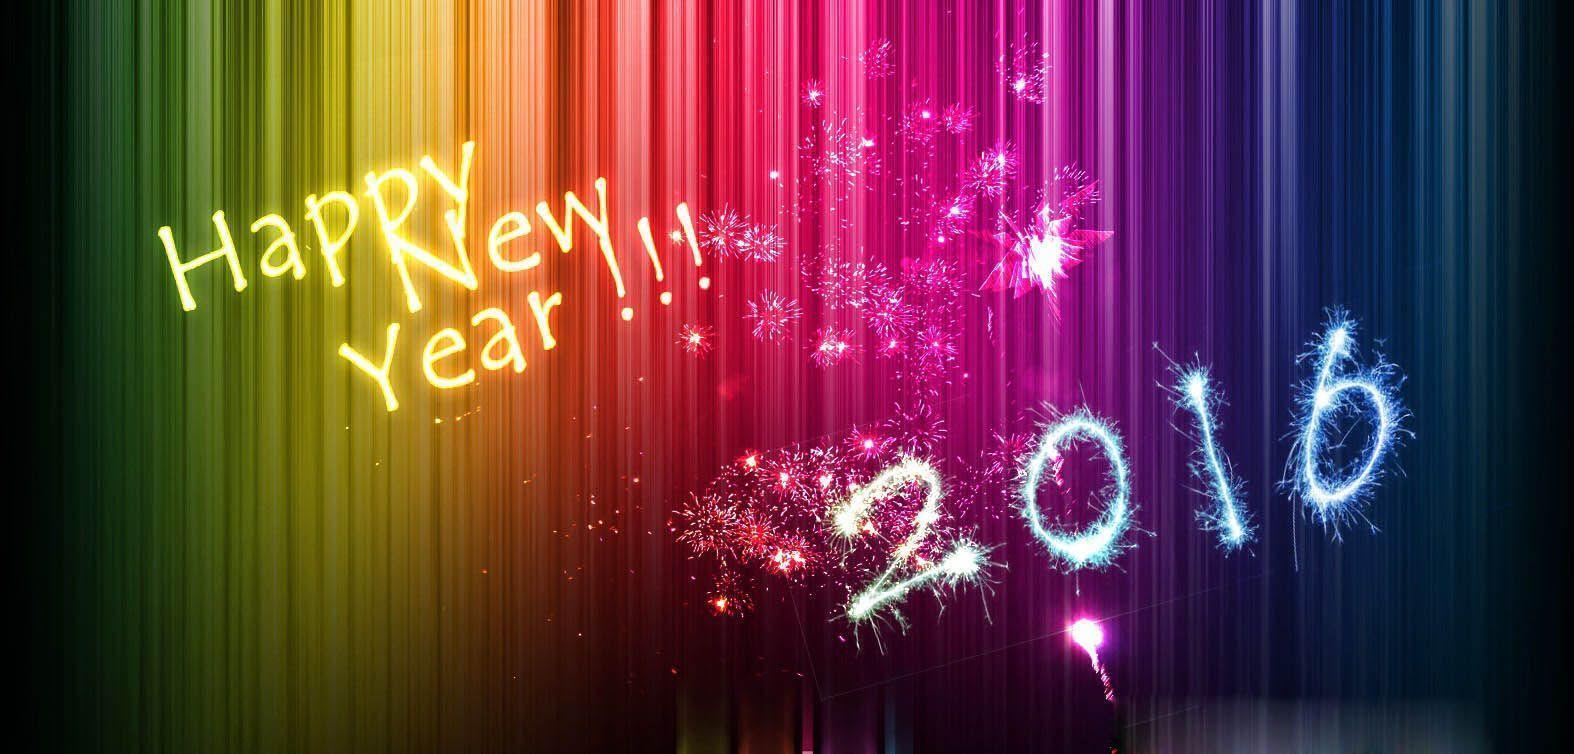 Happy New Year Eve Wallpaper Happy New Year 2016 Wallpaper